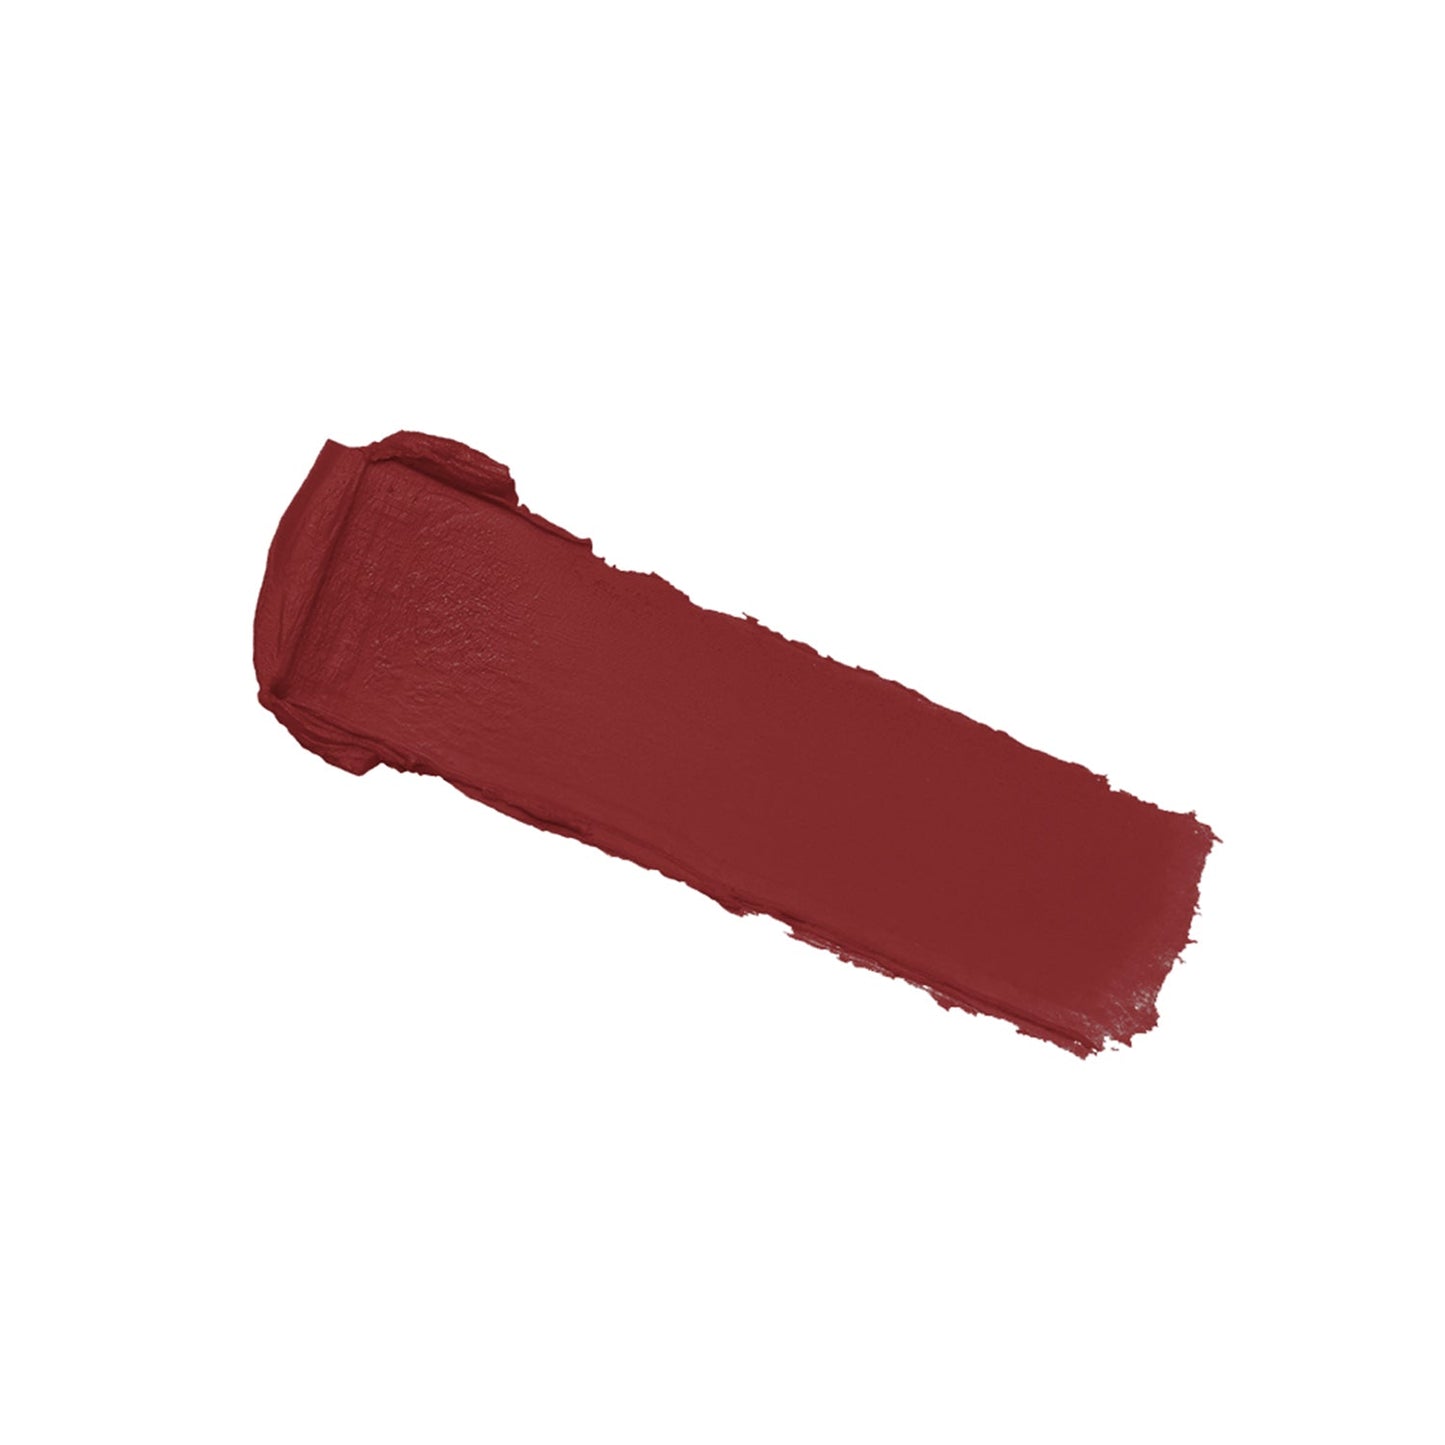 Colorbar Sinful Matte Lipcolor Dirty Date- 027